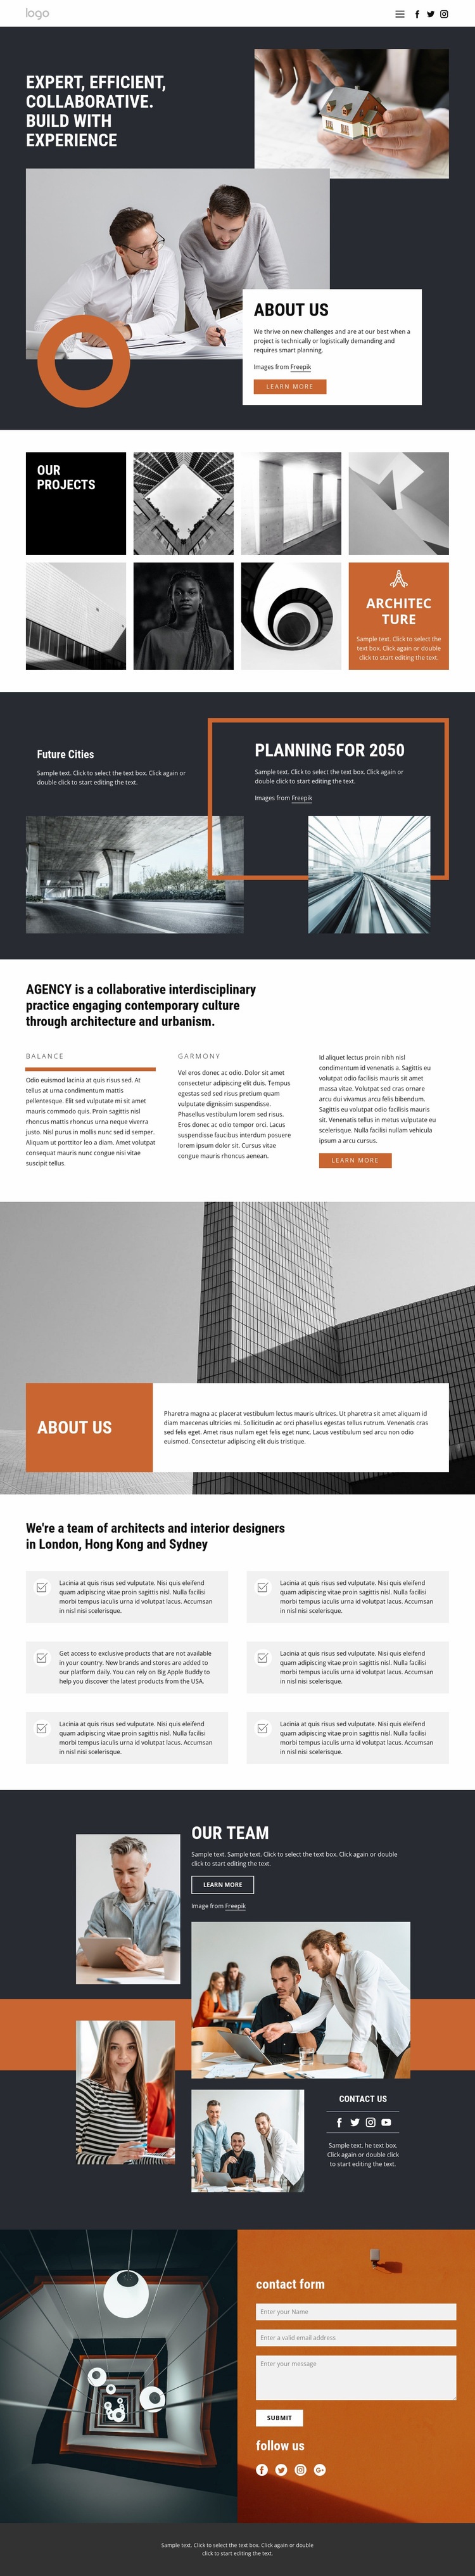 Architects design group Homepage Design